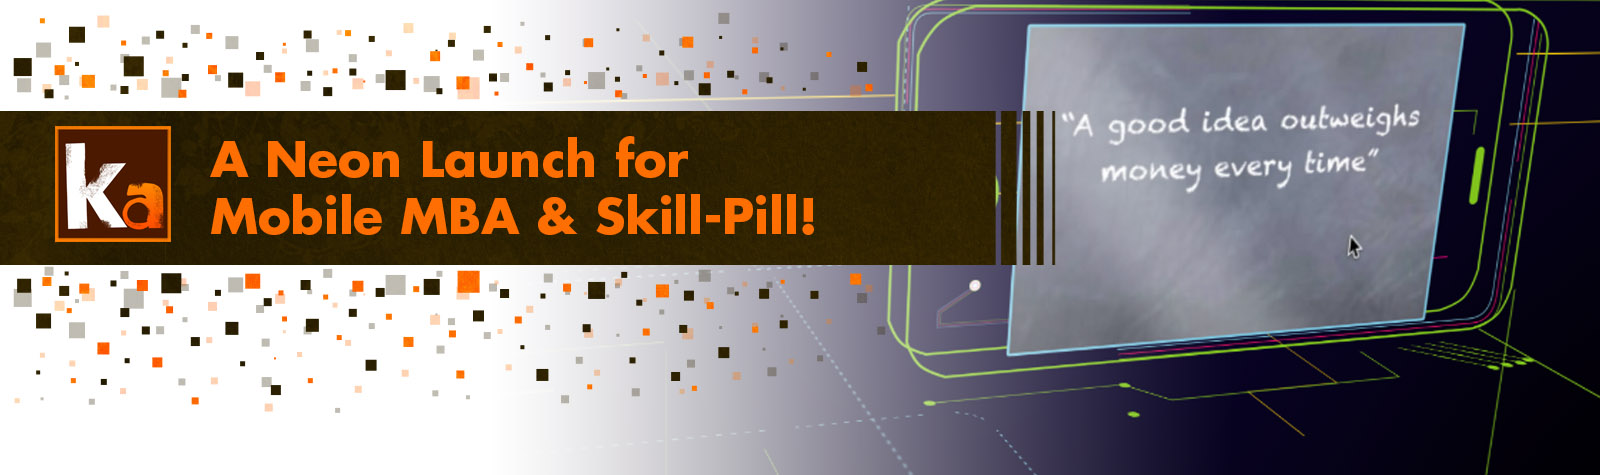 A Neon Launch for Mobile MBA and Skill-Pill!